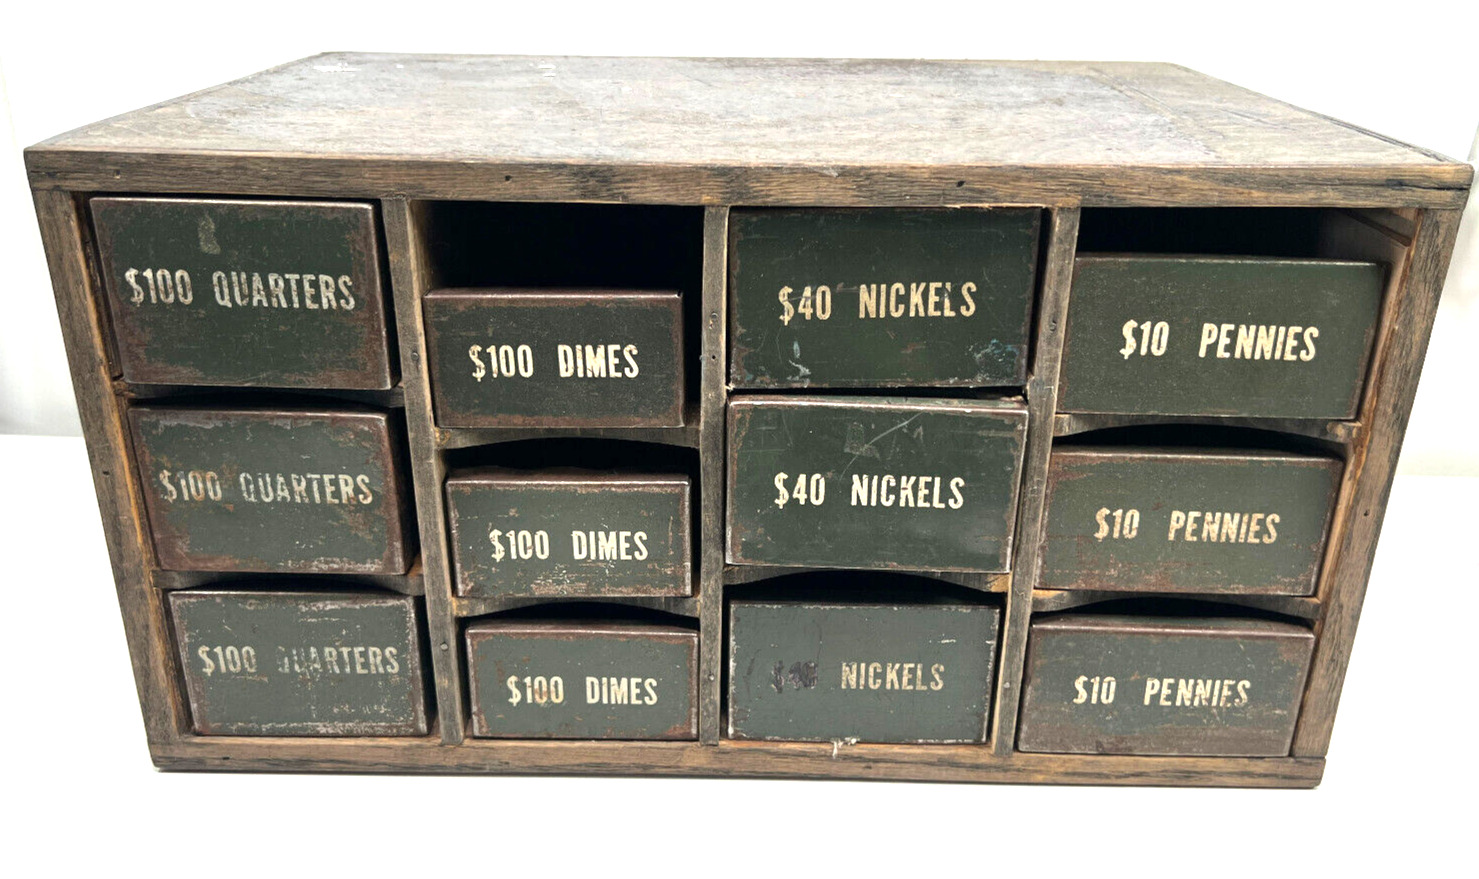 vtg Coin Drawer Box Military? Army? Dimes Nickels Pennies change register